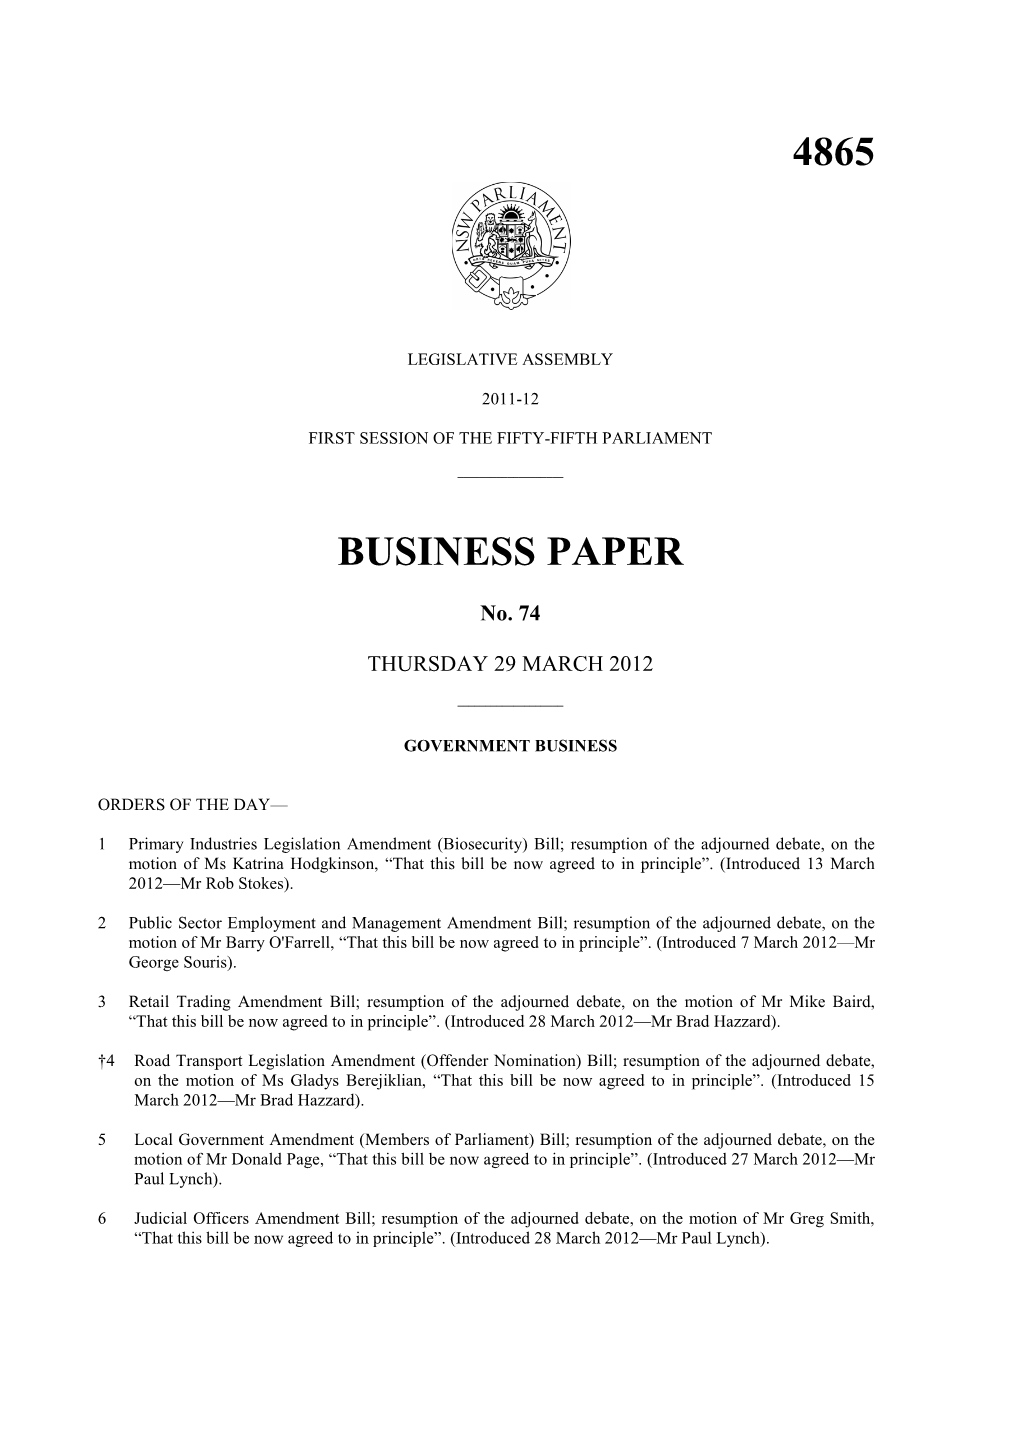 4865 Business Paper